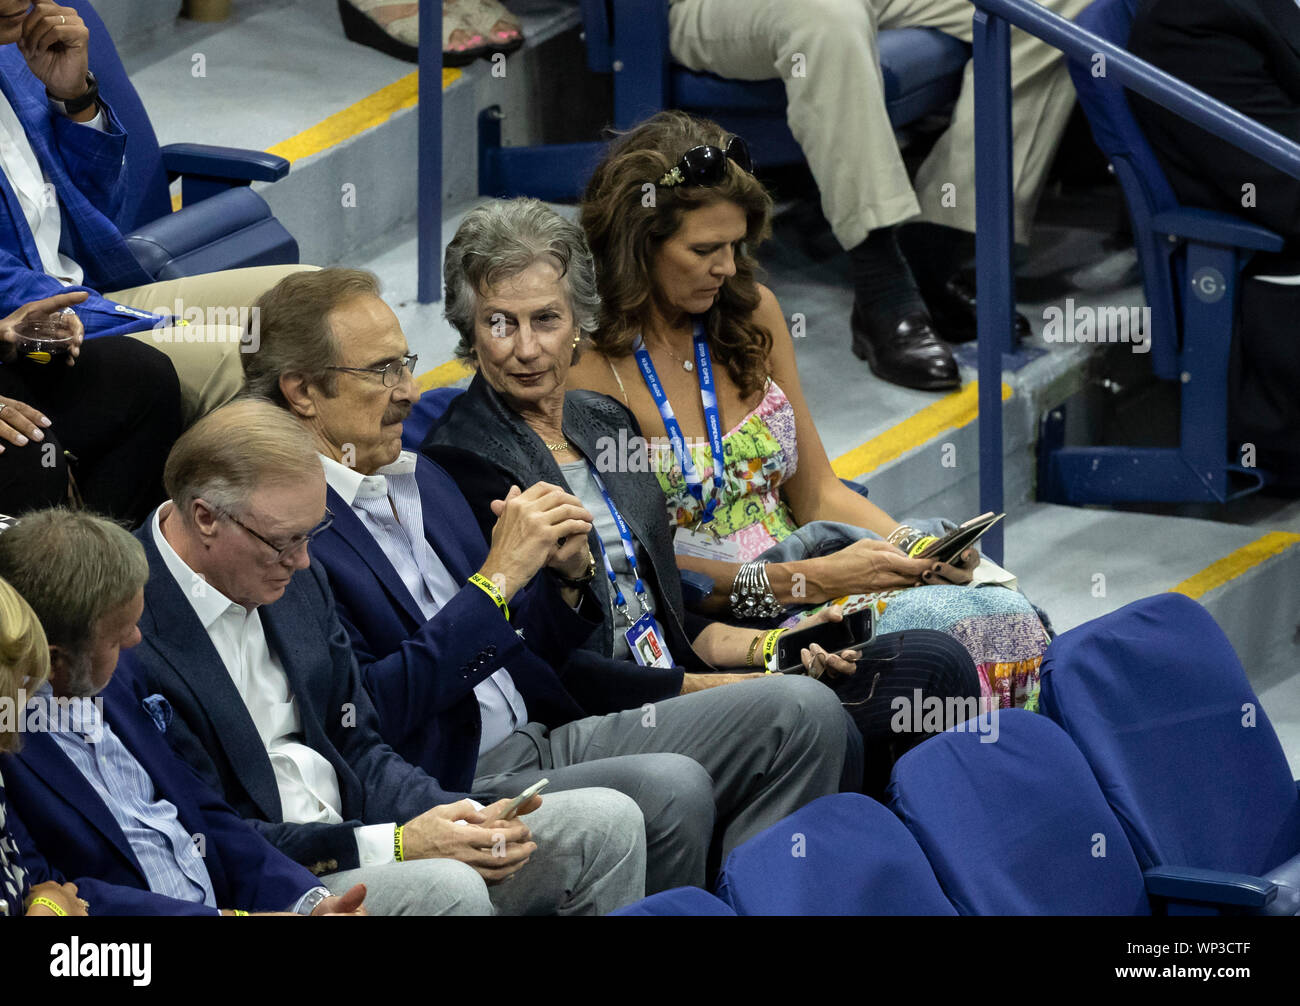 New York, NY - September 6, 2019: Virginia Wade attends mens semifinal match at US Open Championships between Grigor Dimitrov (Bulgaria) and Daniil Medvedev (Russia) at Billie Jean King National Tennis Center Stock Photo